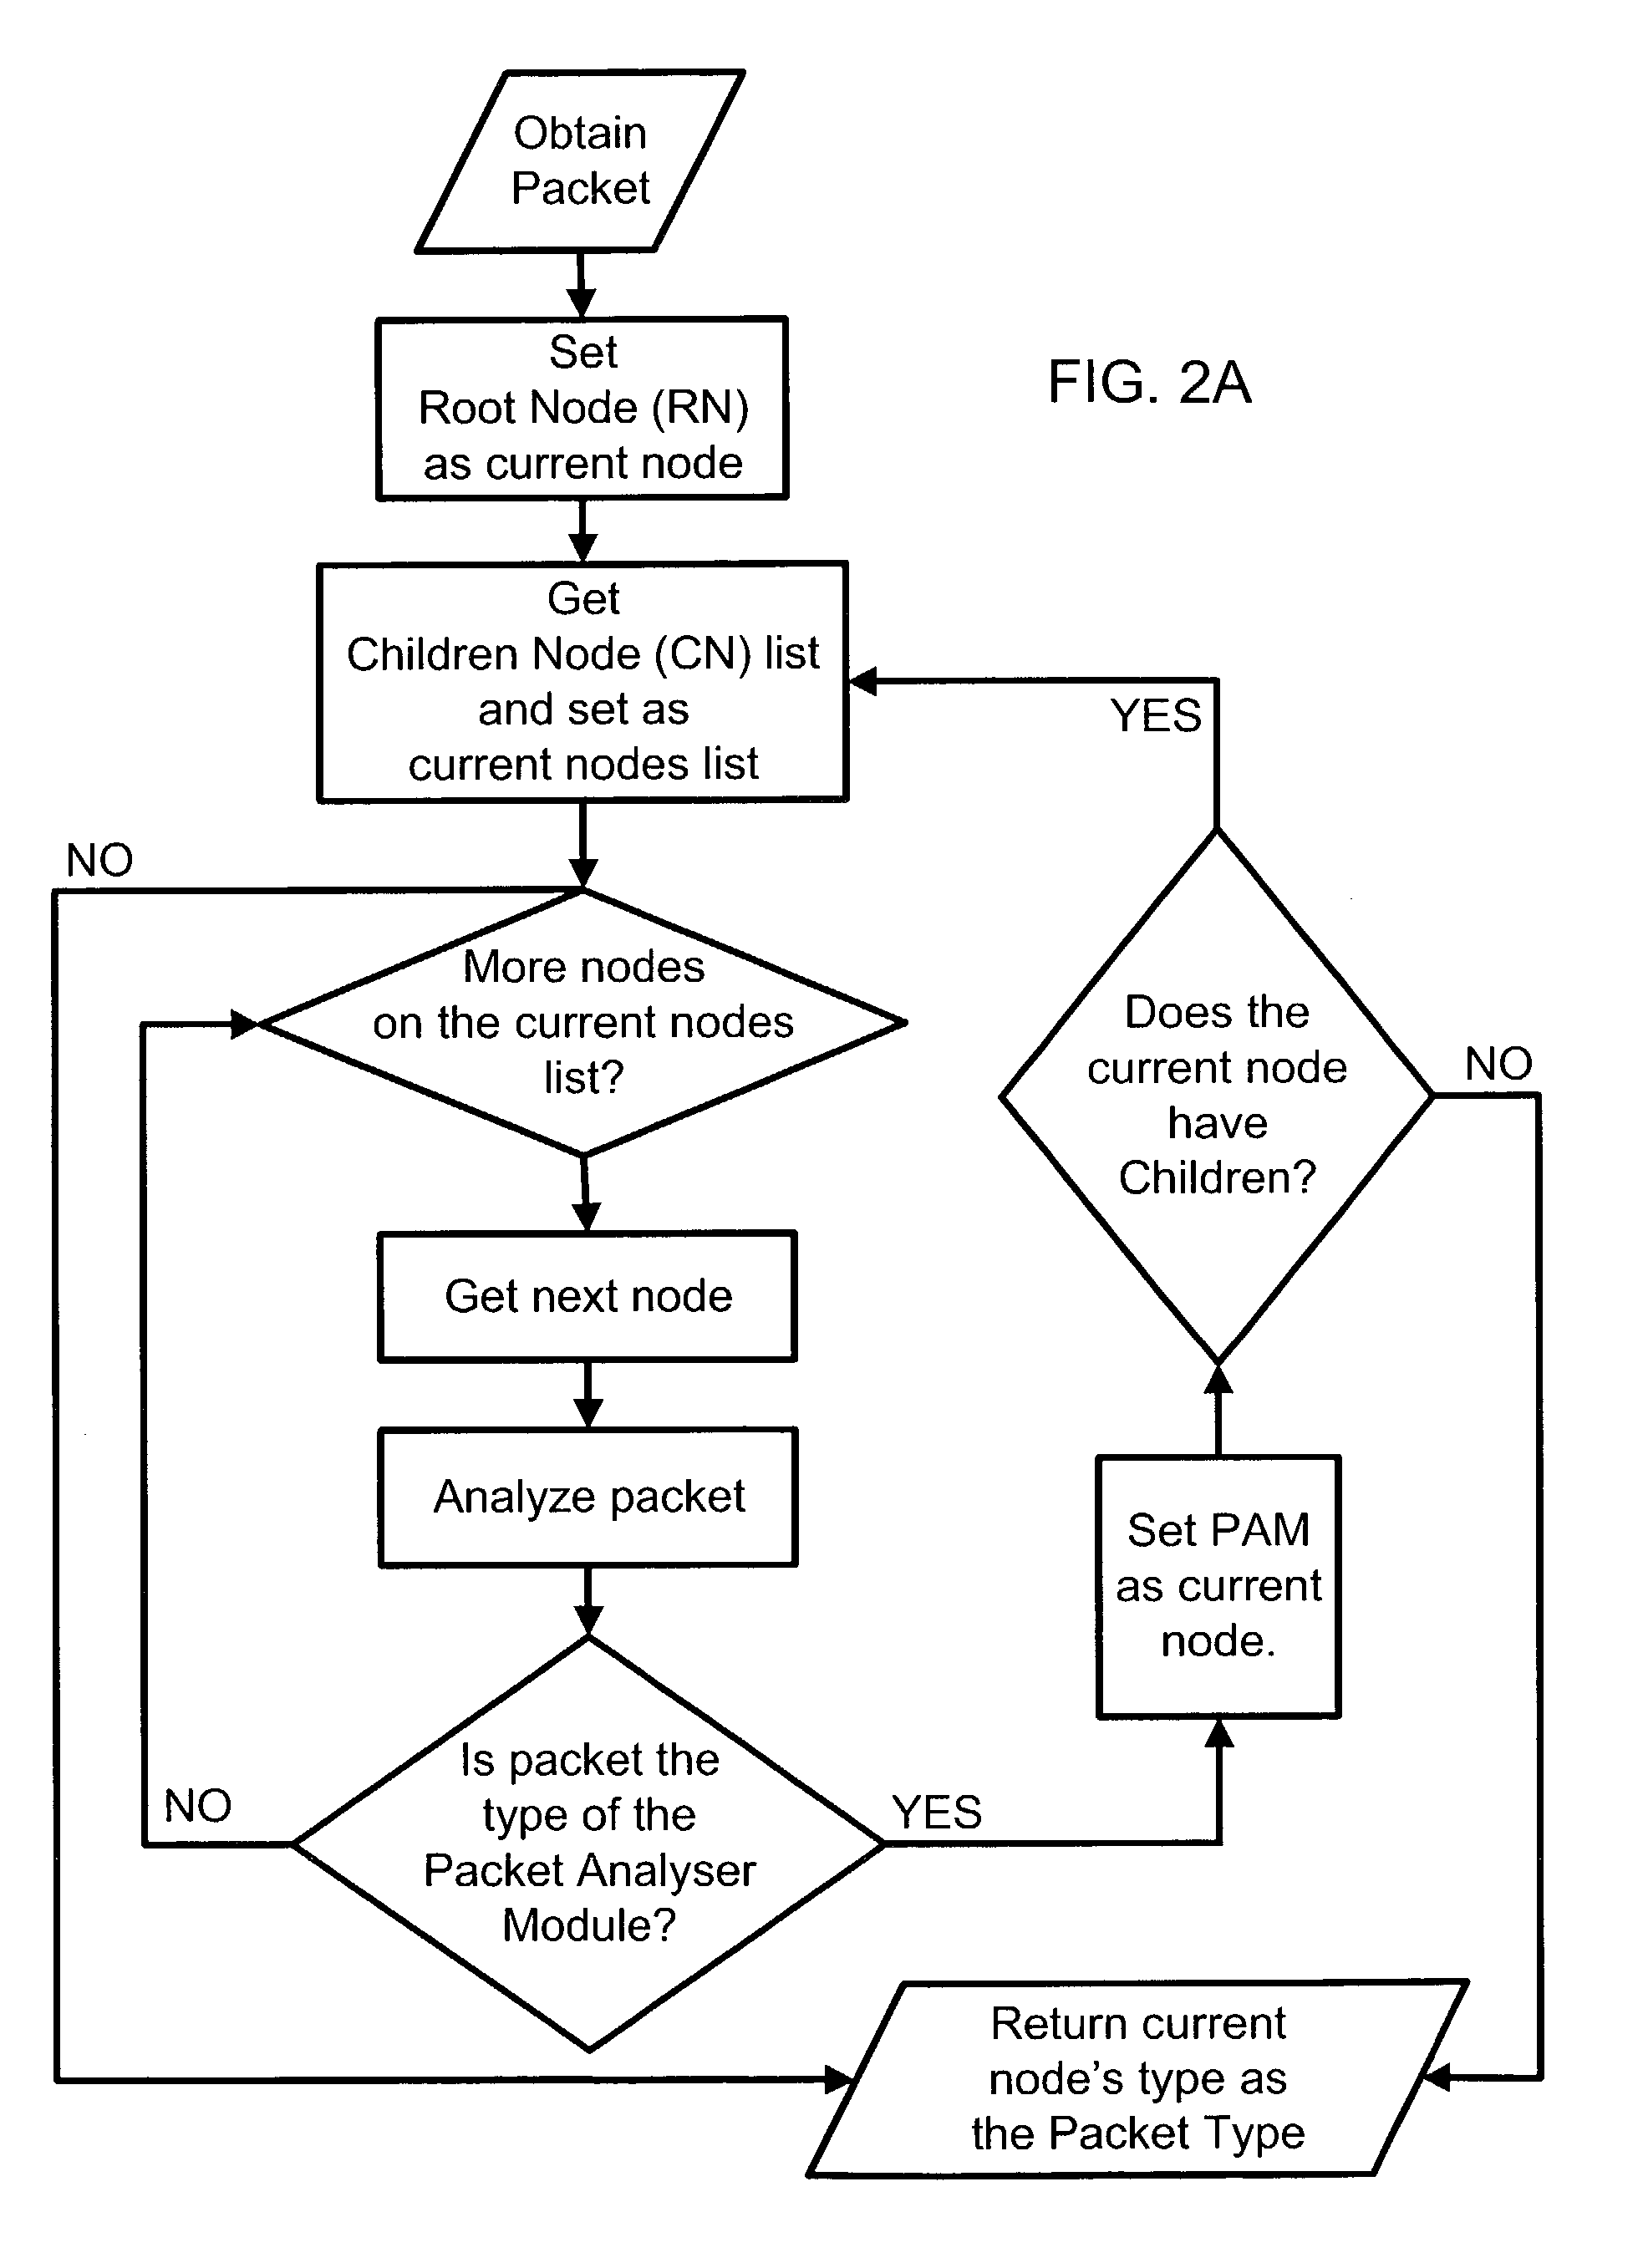 Method for implementing an internet protocol (IP) charging and rating middleware platform and gateway system